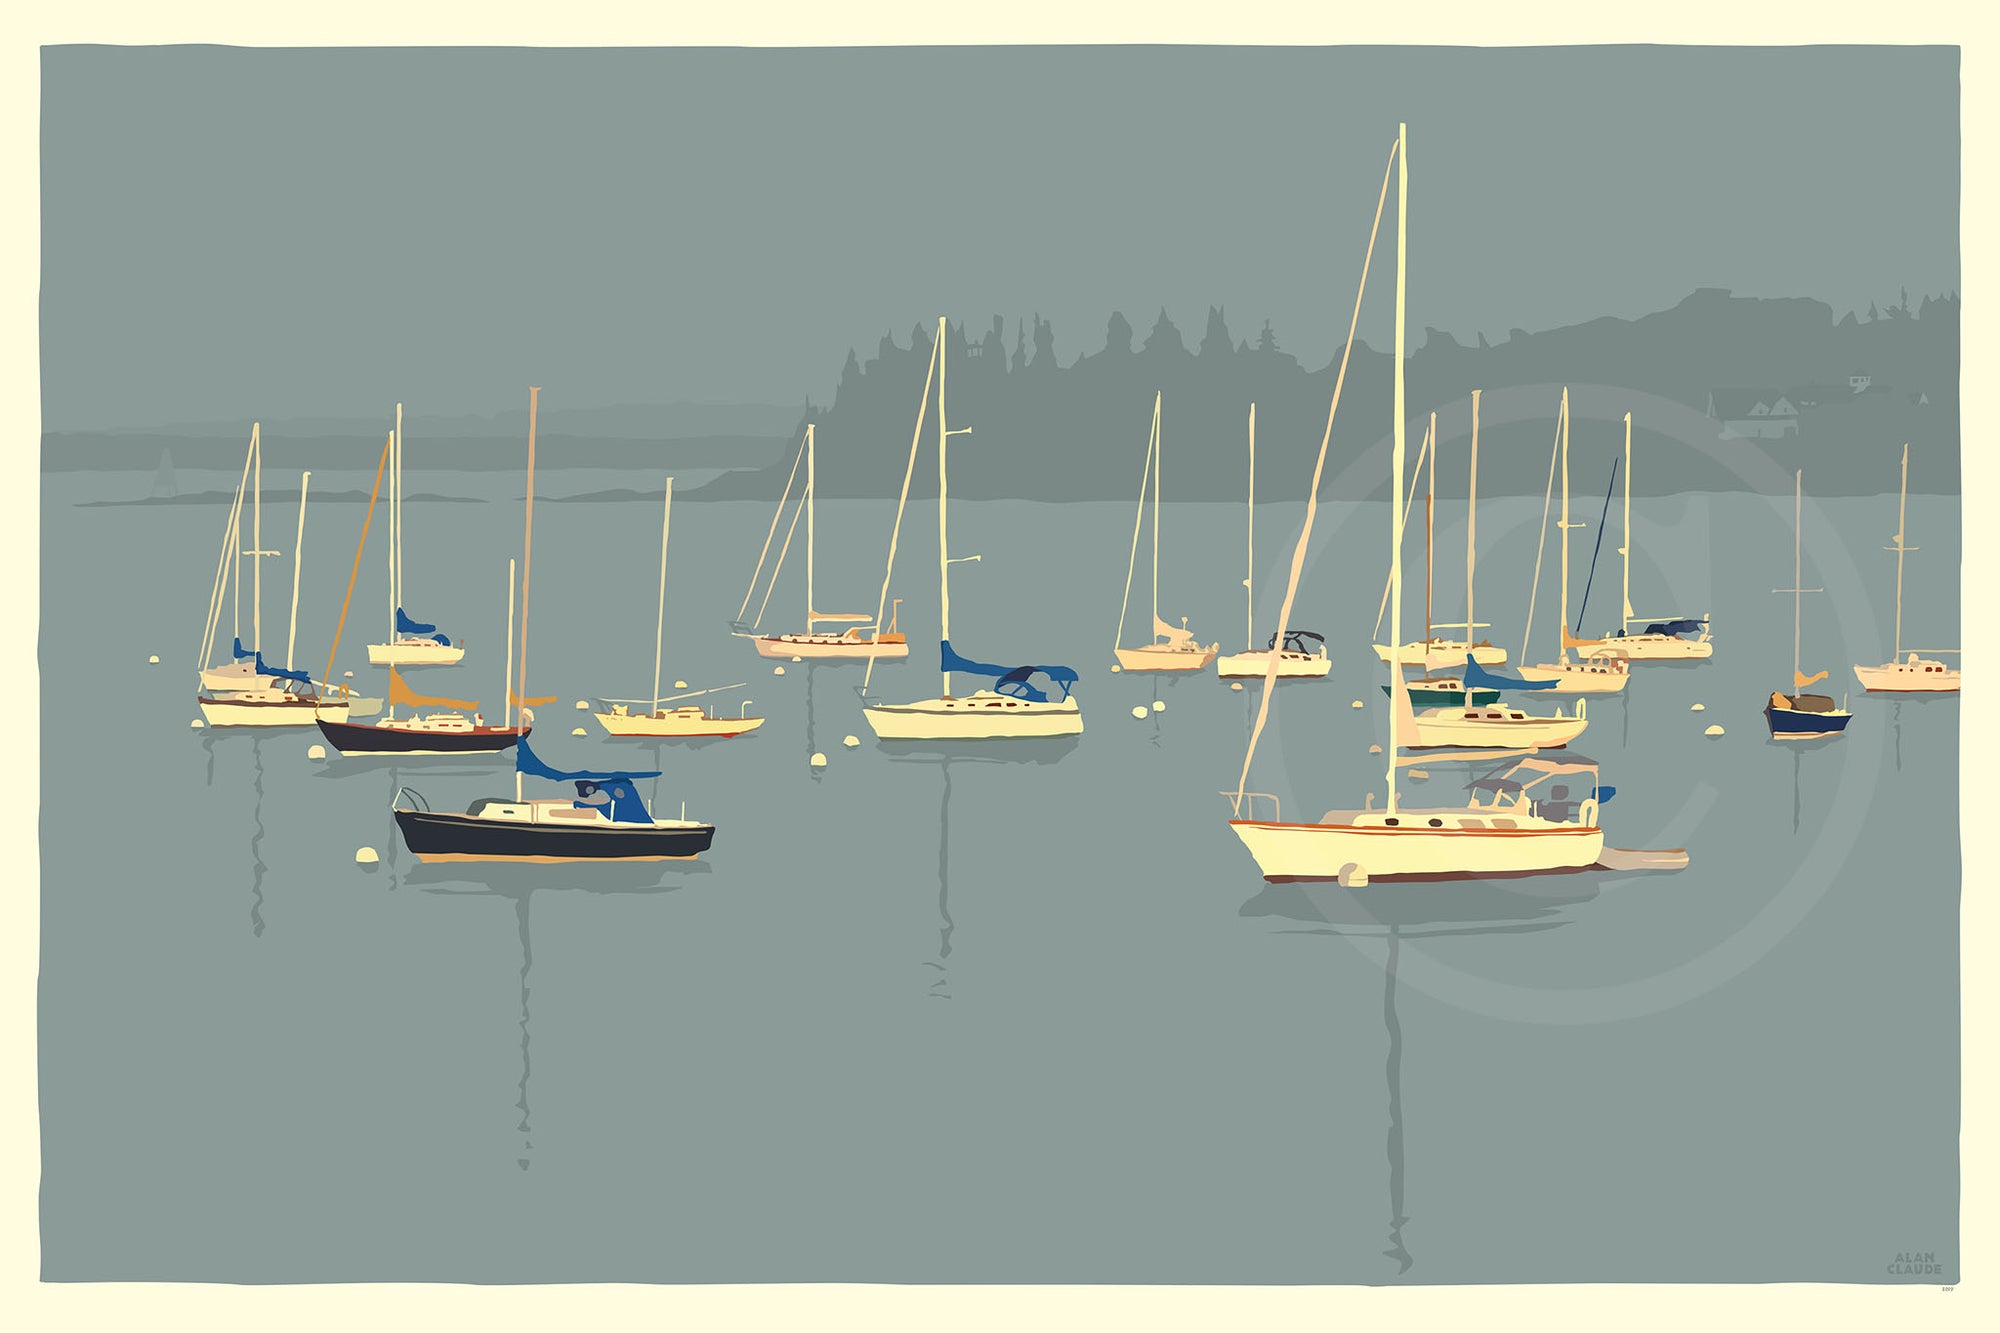 Sailboats in Rockland Harbor Art Print 24" x 36" Wall Poster By Alan Claude - Maine